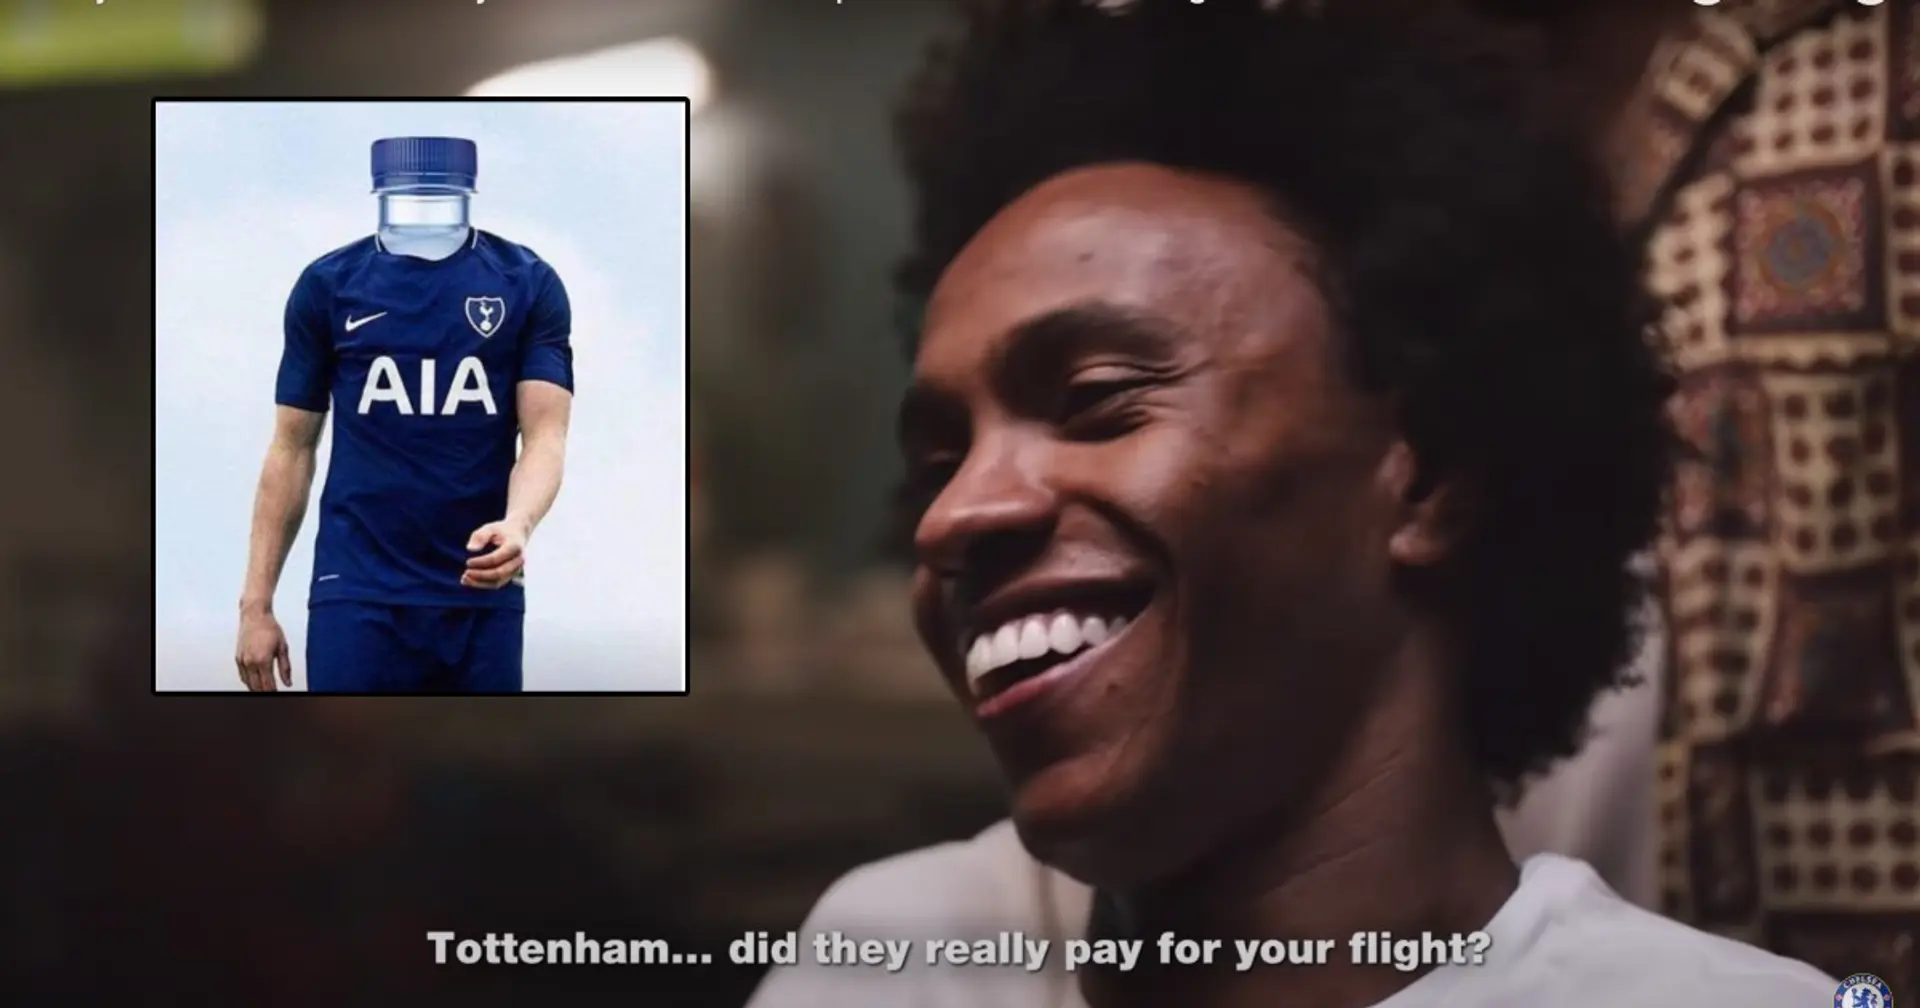 'I was at Spurs training ground': Willian reveals how he ditched Tottenham at the last minute to join Chelsea